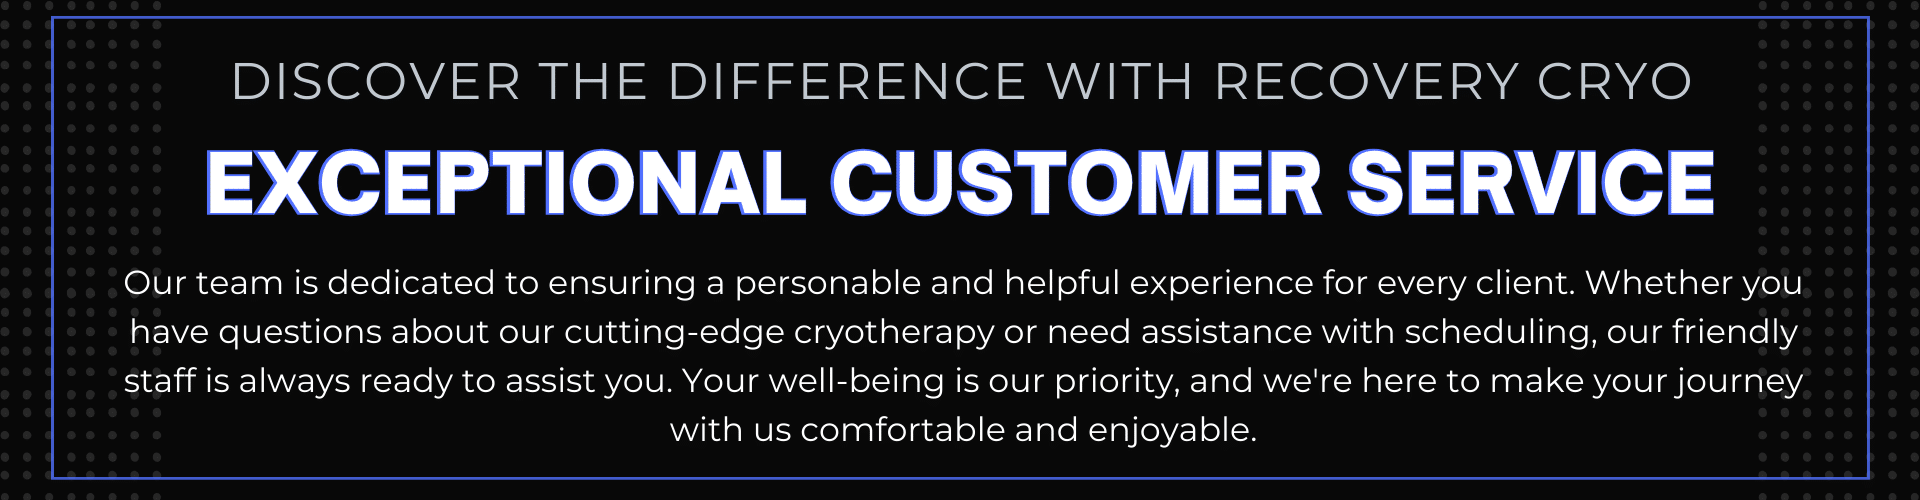 Experience innovation, exceptional customer service and flexible hours at Recovery Cryo!